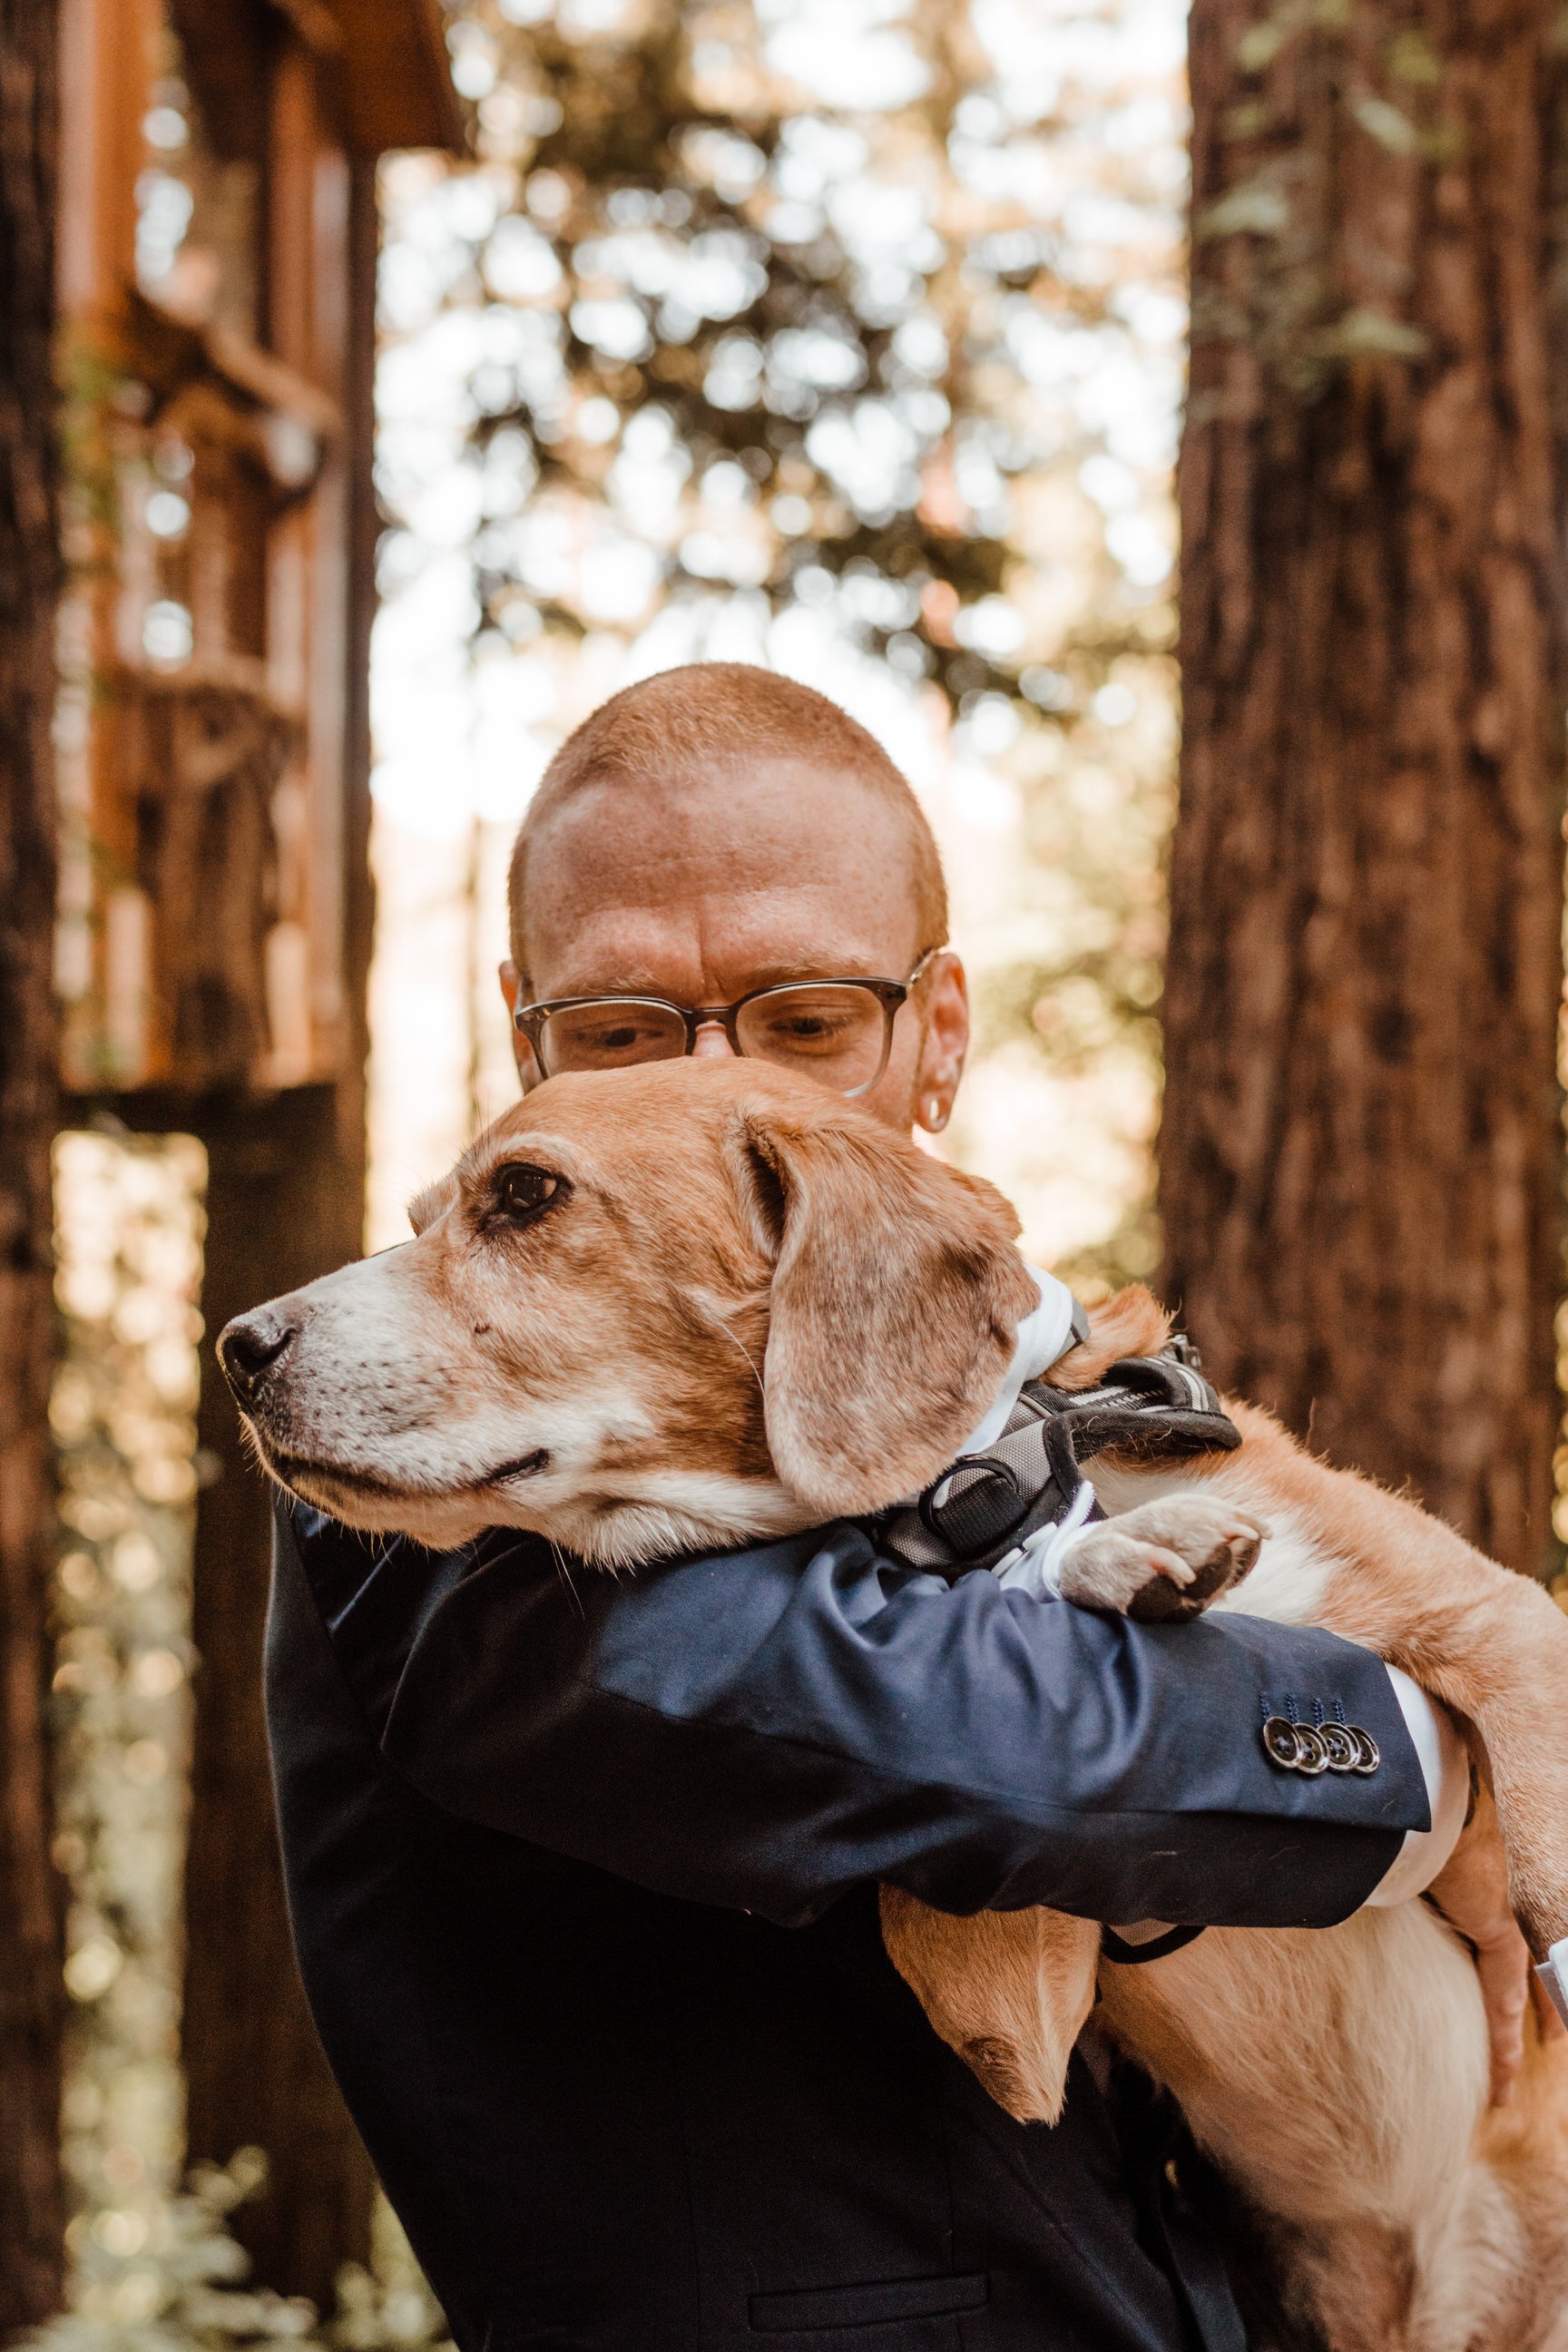 Wedding-in-the-Woods-Red-Haired-Groom-with-Senior-Rescue-Dog-Beagle (4).jpg